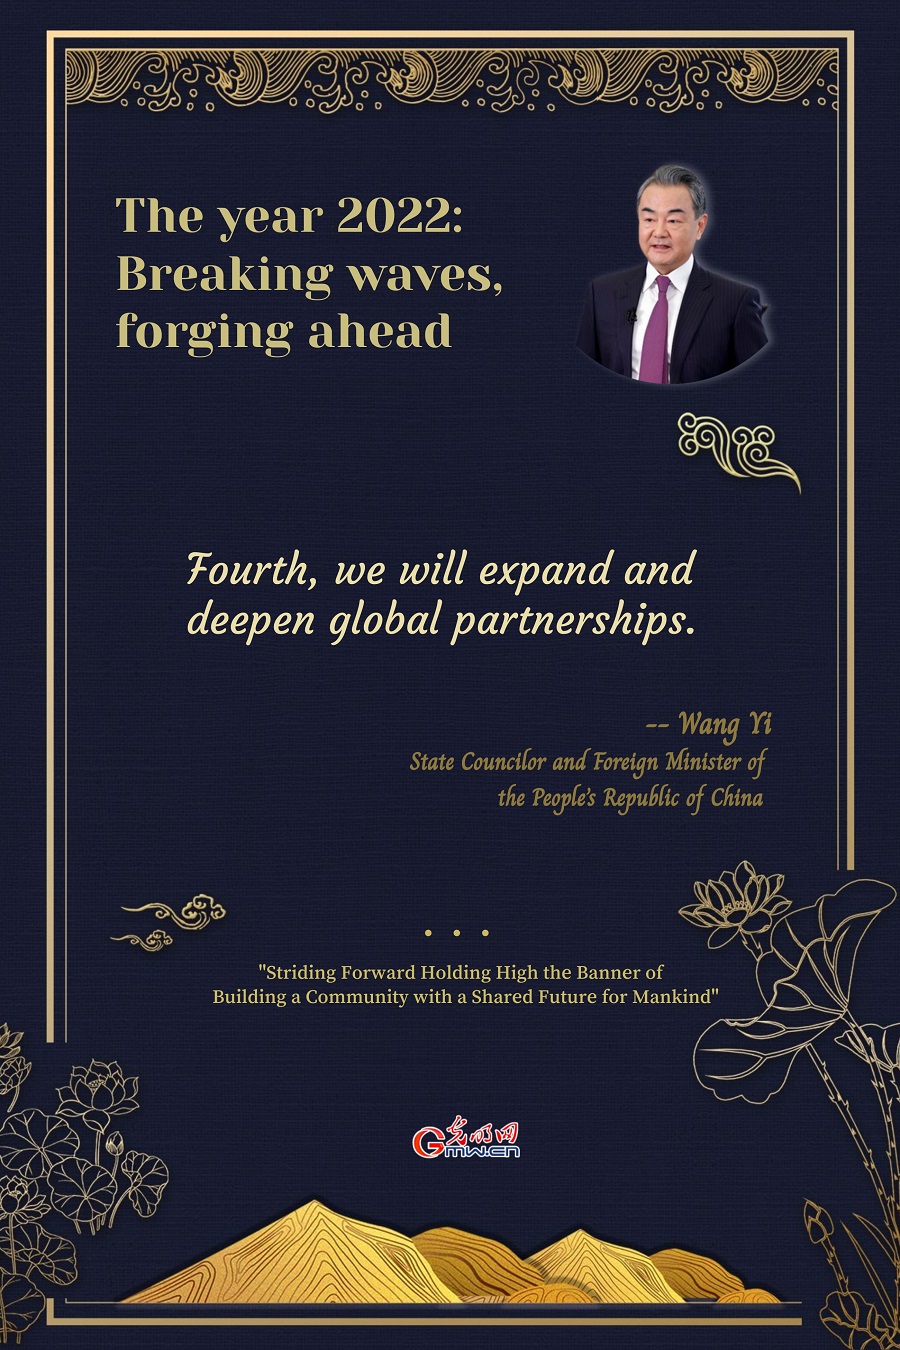 The year 2022: Breaking waves, forging ahead